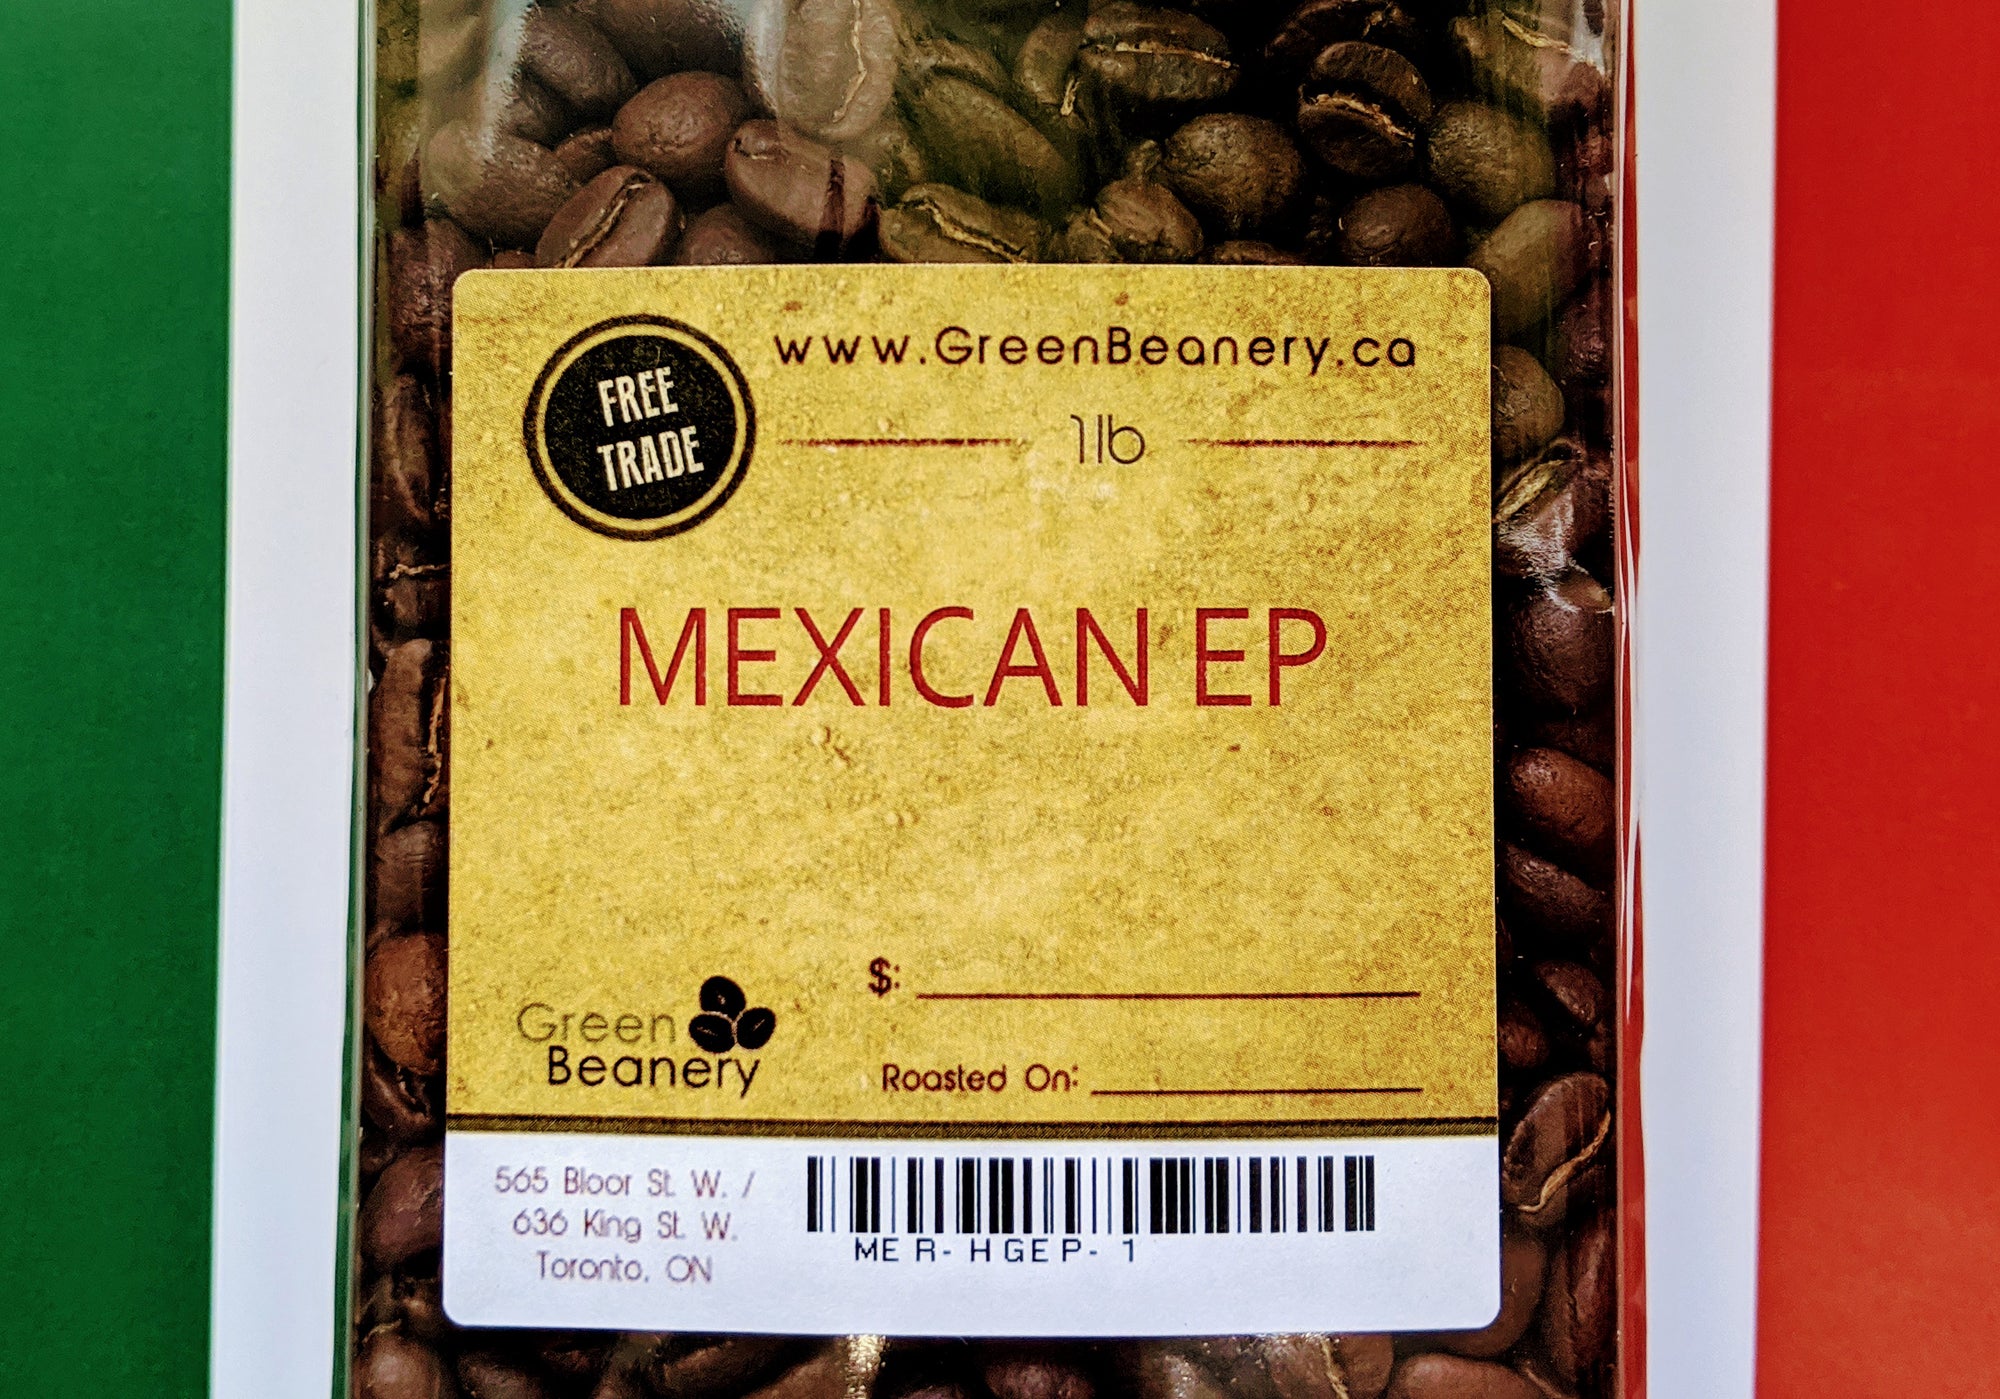 Roasted - Mexican Chiapas HG EP (Coffee of the Week)